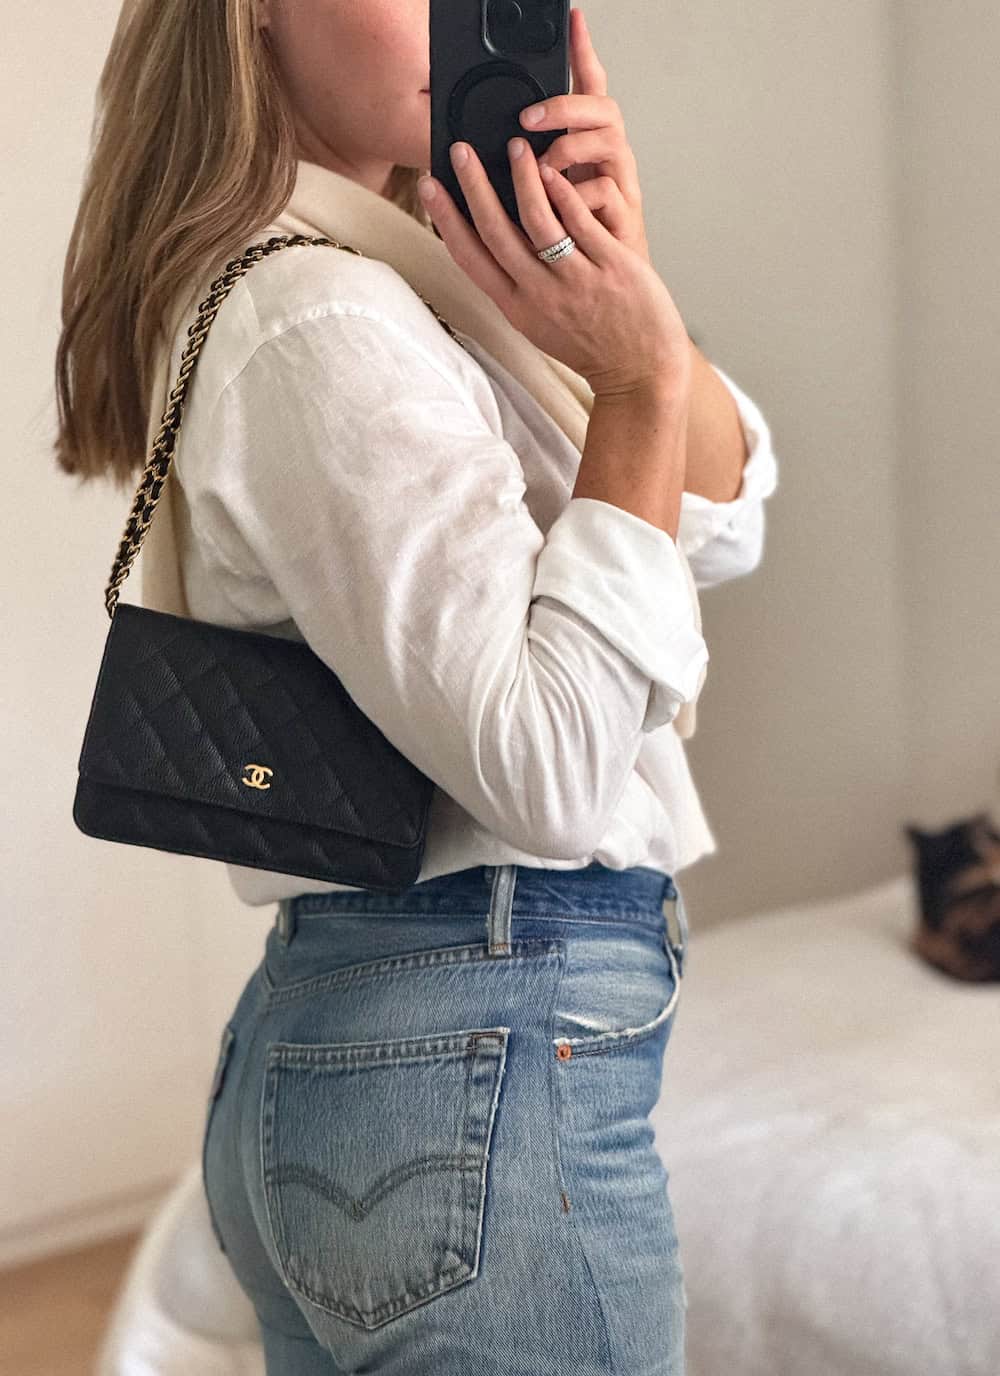 Woman wearing a black Chanel wallet on chain wearing a white button up shirt, cream sweater, and blue jeans